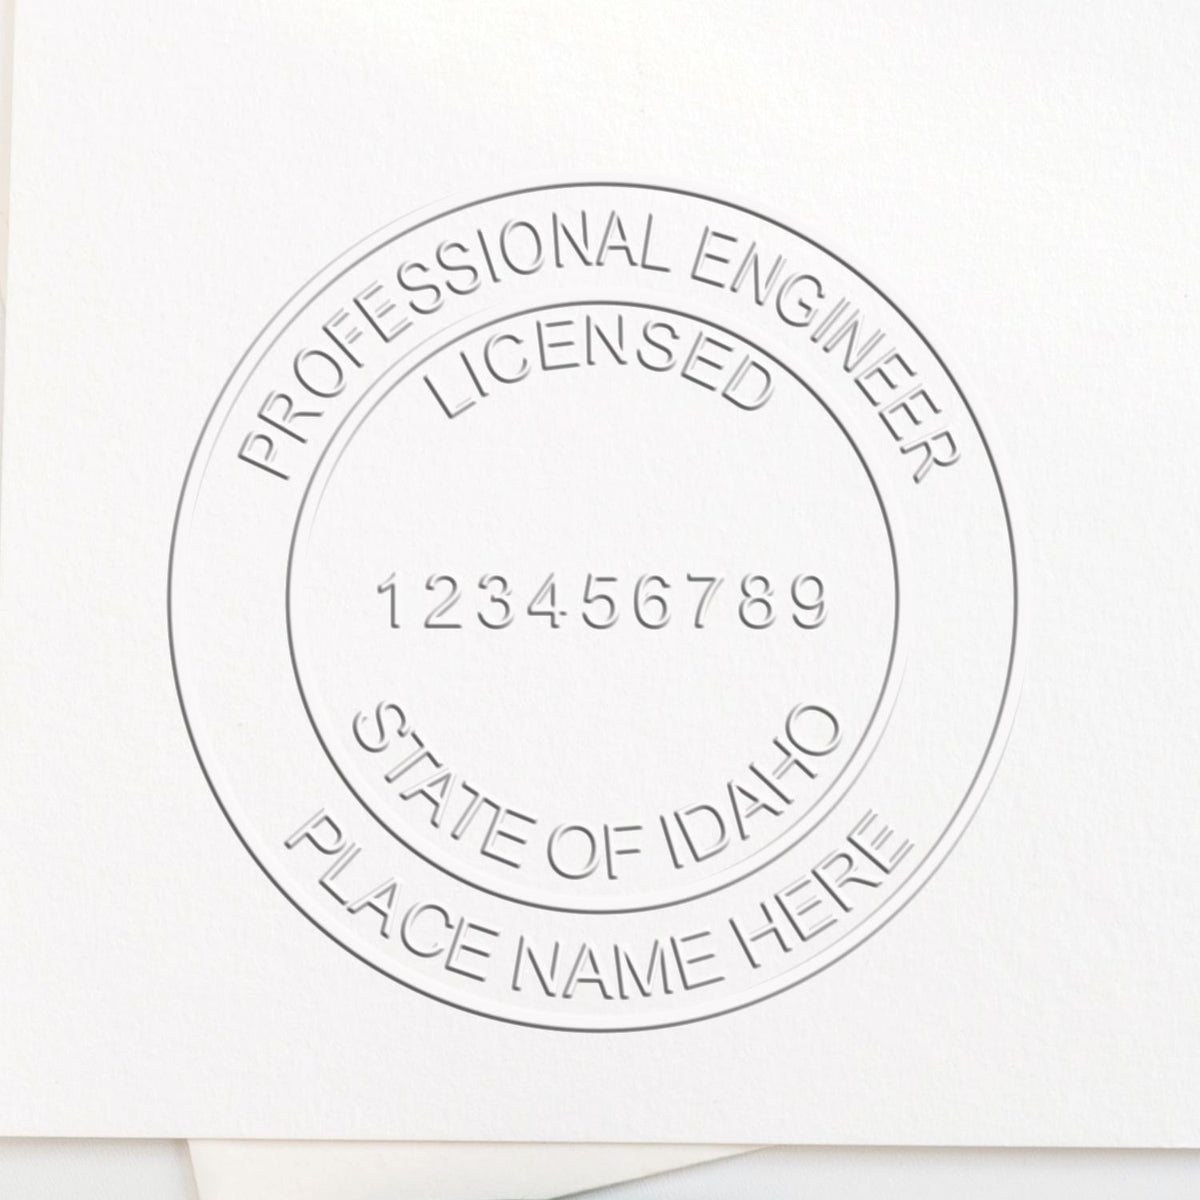 A lifestyle photo showing a stamped image of the Handheld Idaho Professional Engineer Embosser on a piece of paper